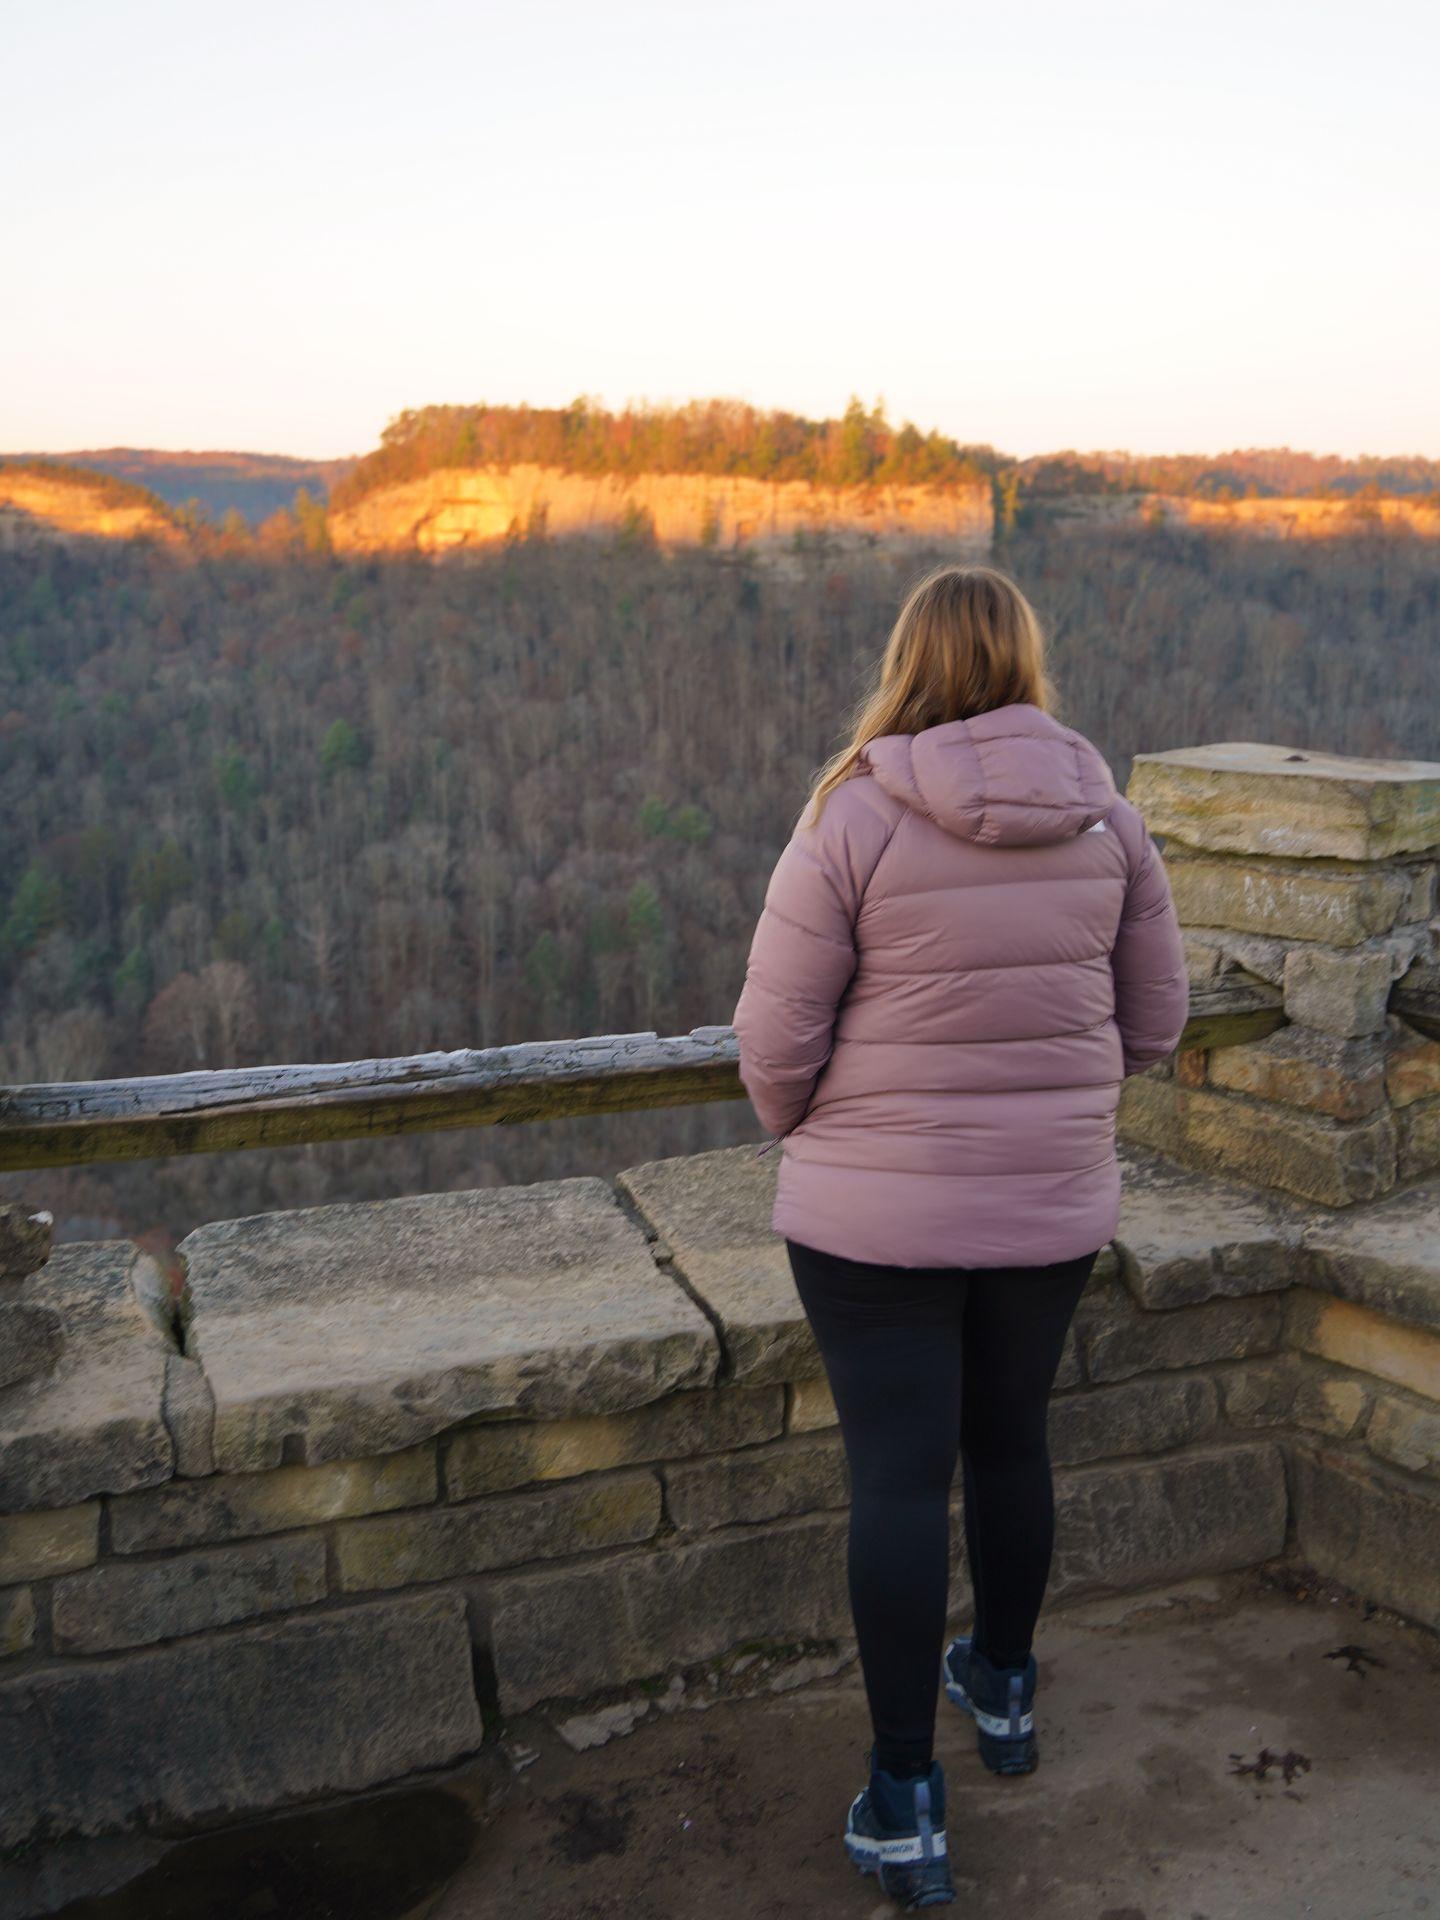 Lydia standing at the railing and looking out at the Chimney Top viewpoint.